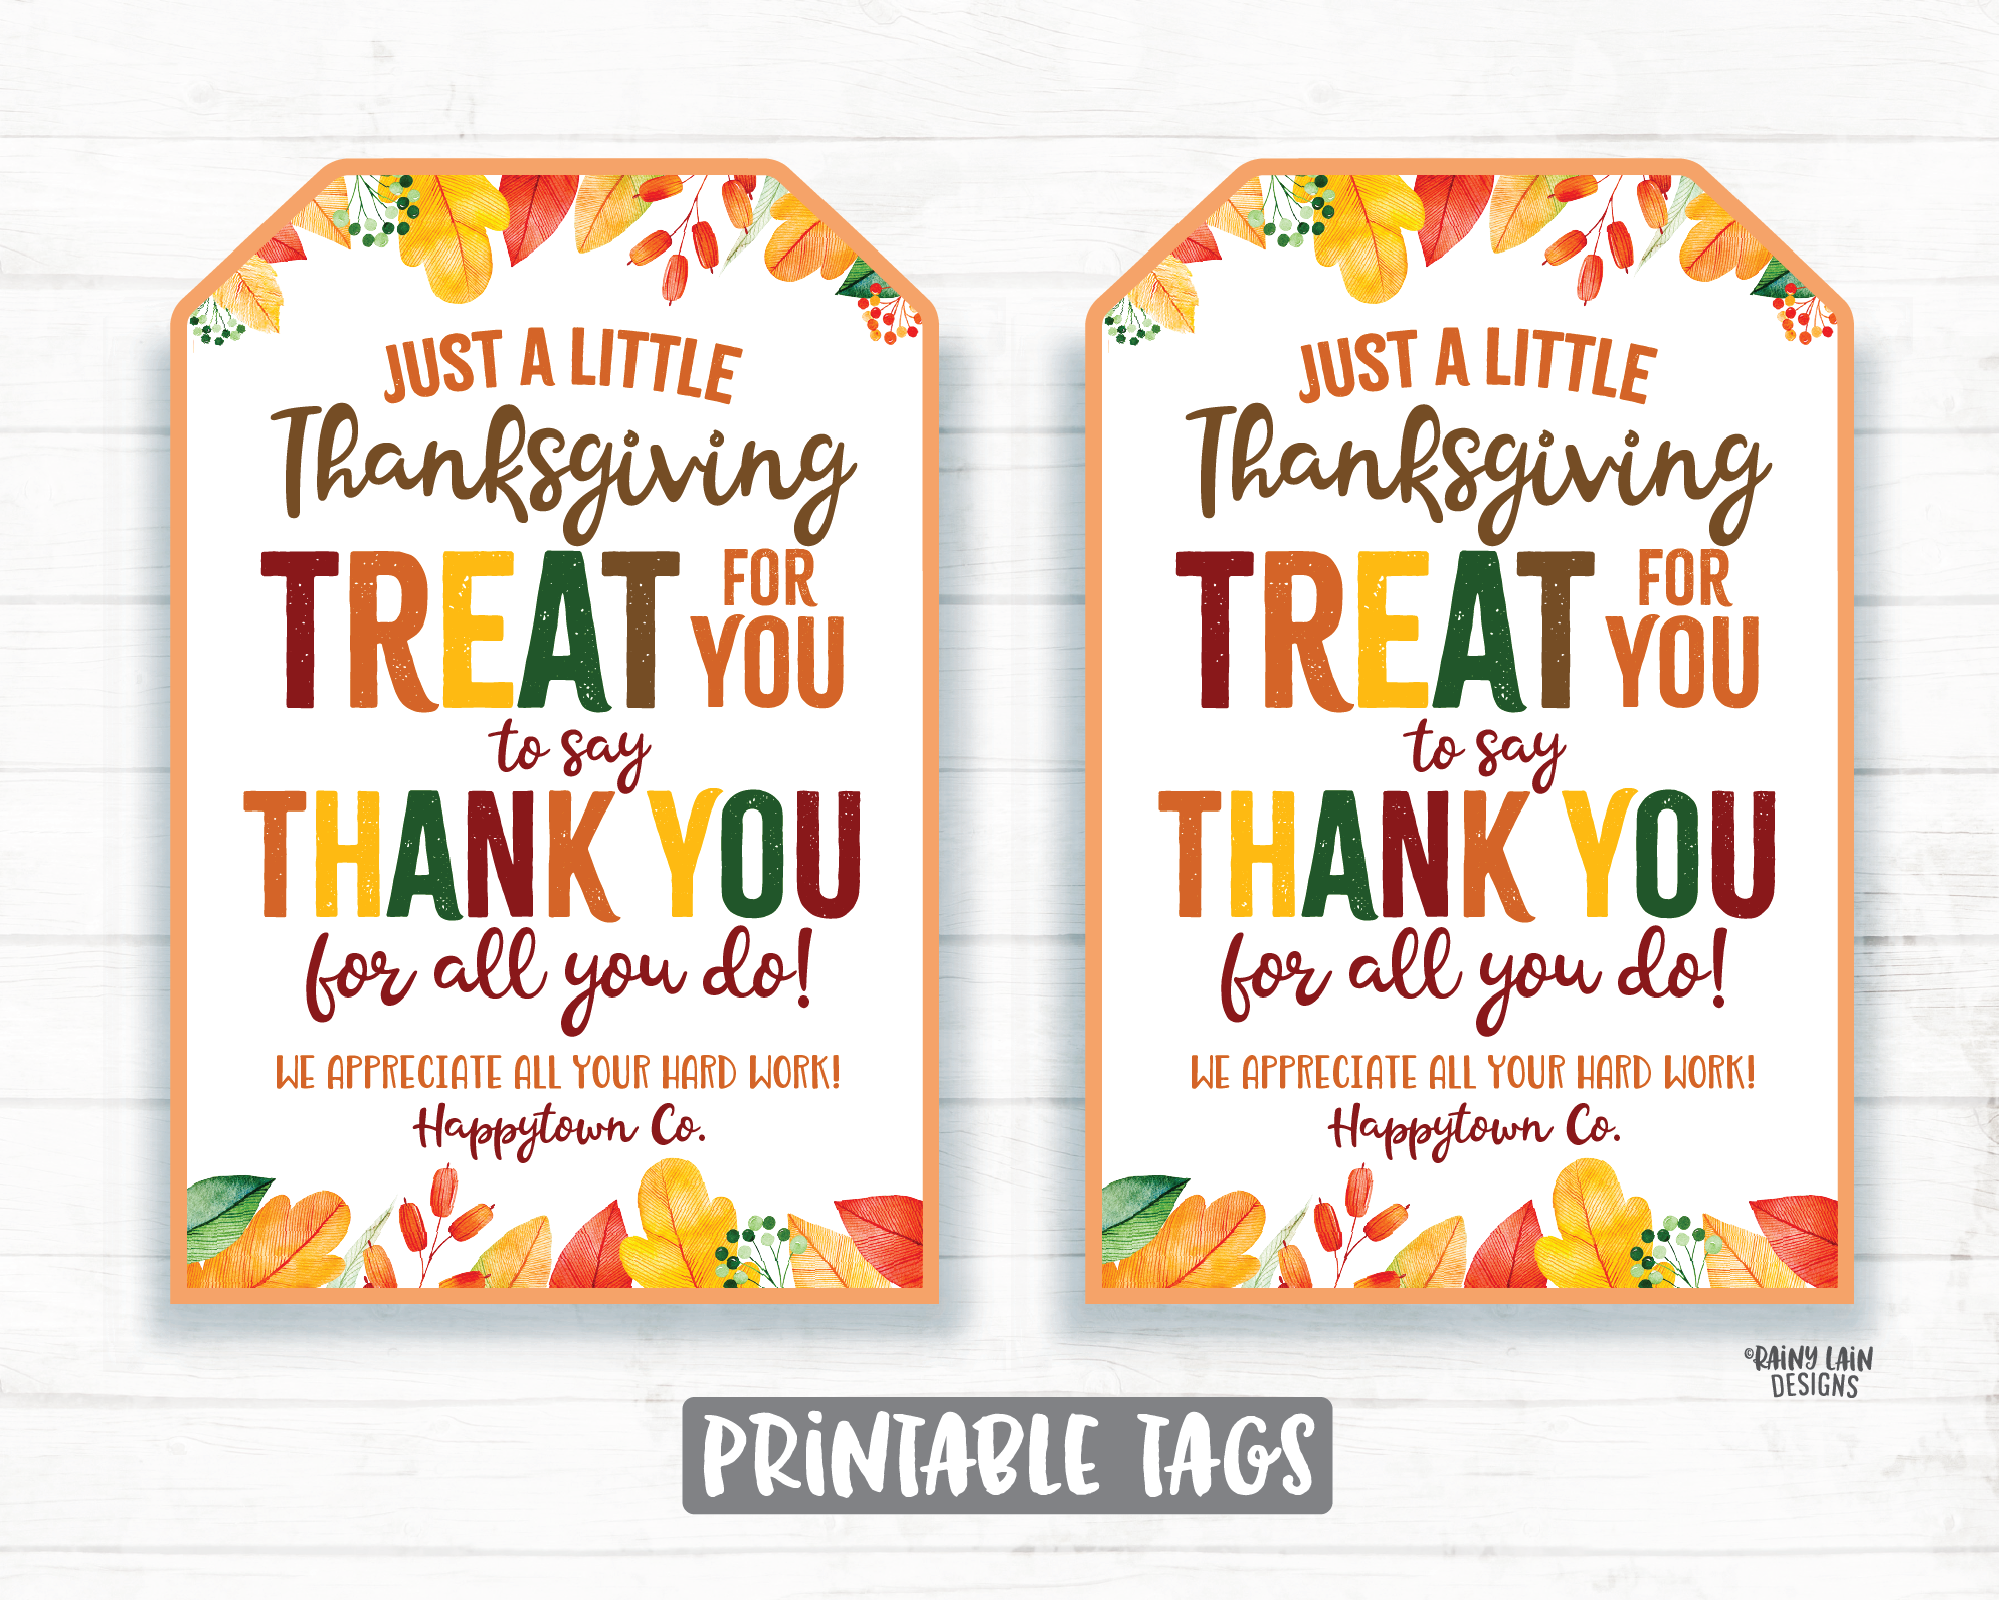 52+ Sincere Thank You Messages To Show Your Appreciation